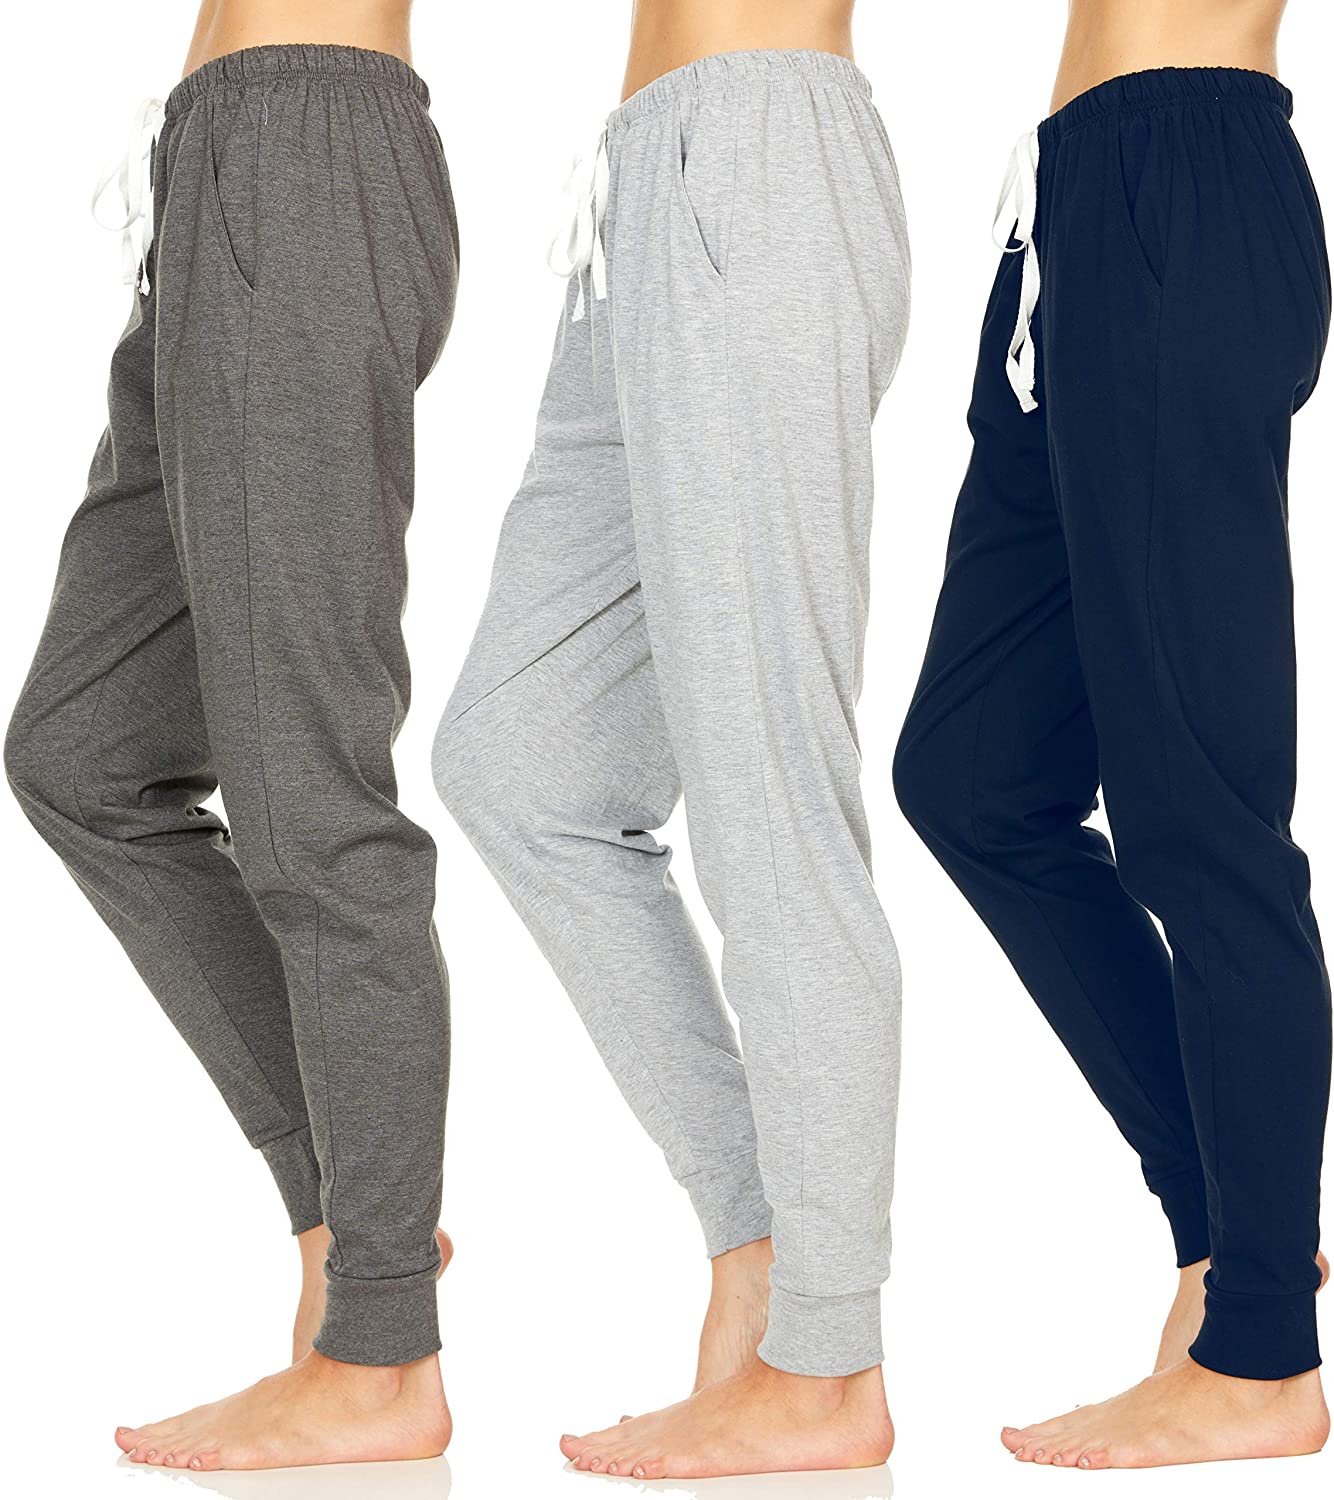 Essential Elements 3 Pack: Women's 100% Cotton Active Gym Lounge Sleep ...